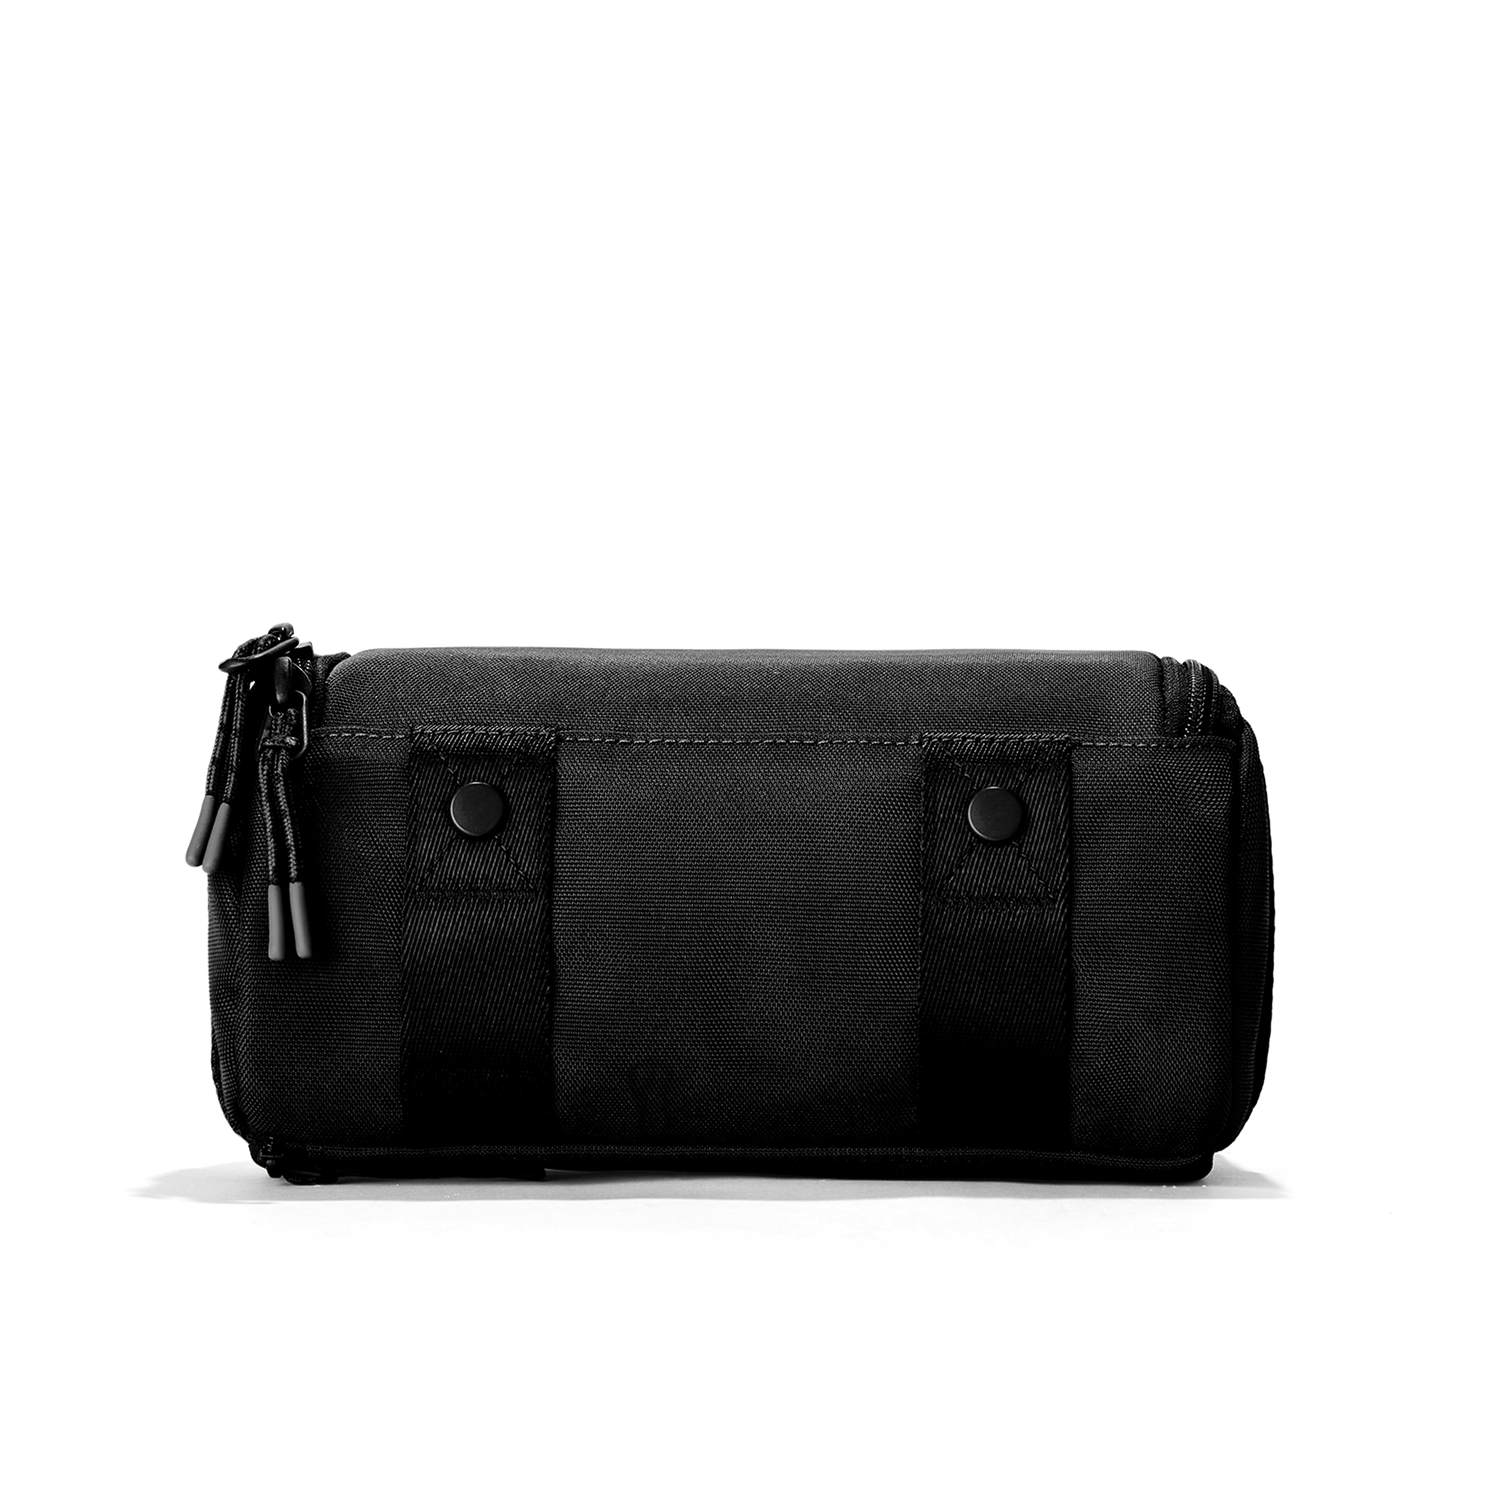 Dagne Dover Extra Small Landon Carryall Duffle Bag in Onyx